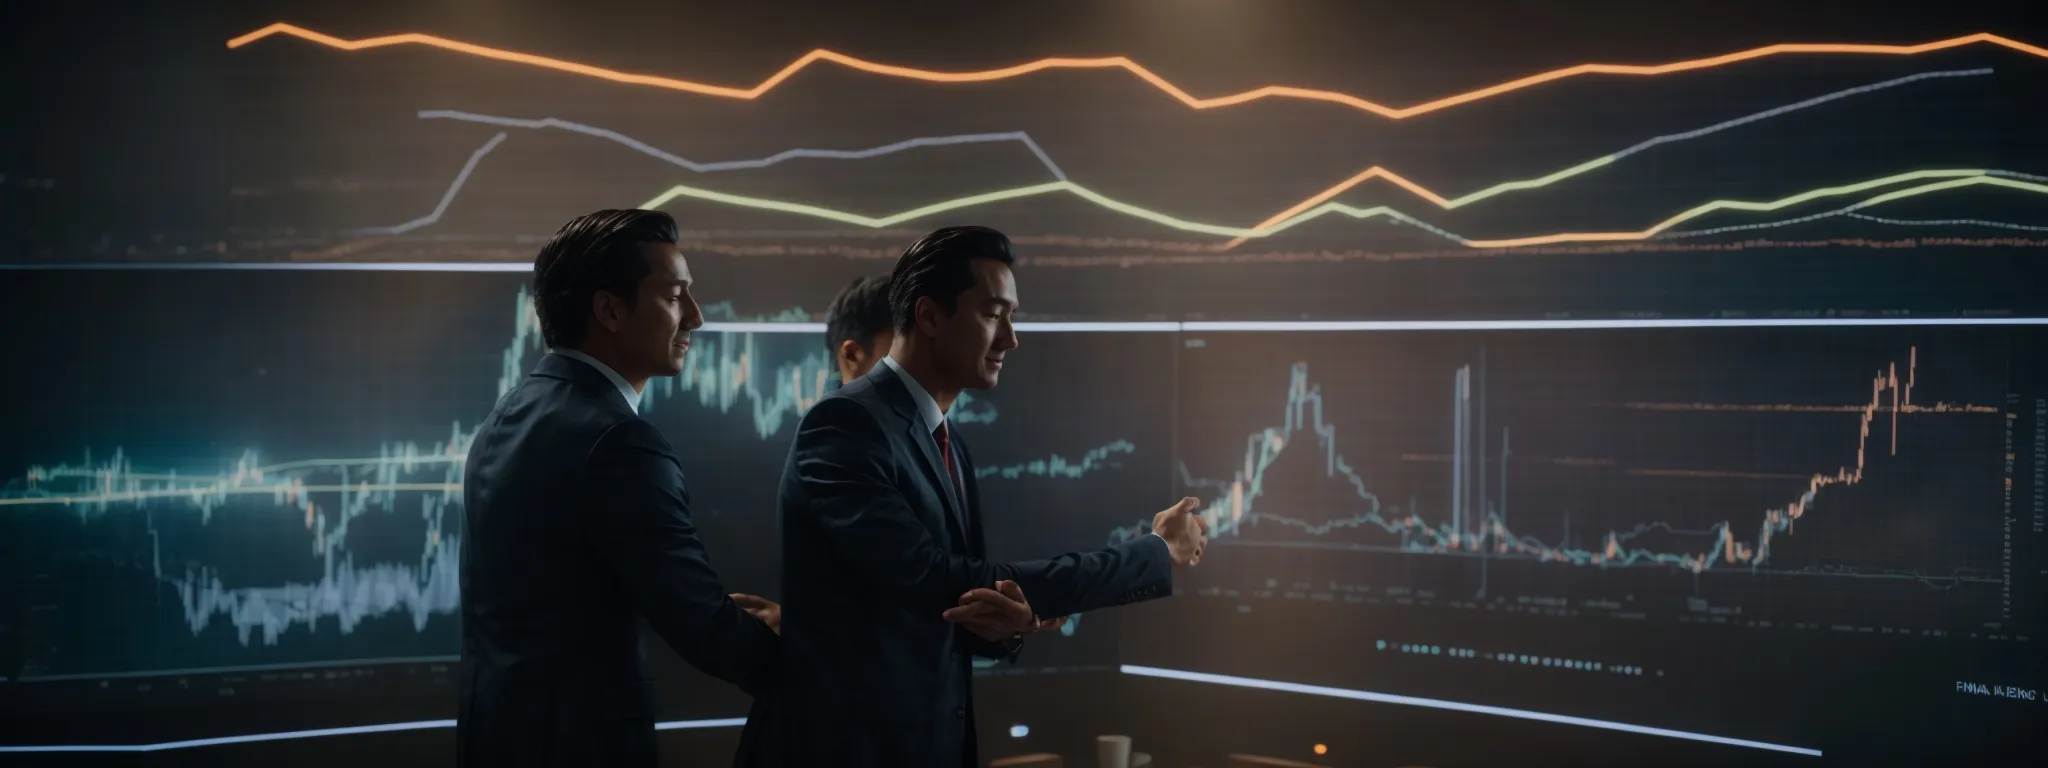 two professionals shake hands in front of a glowing digital screen showing rising graphs and web analytics.